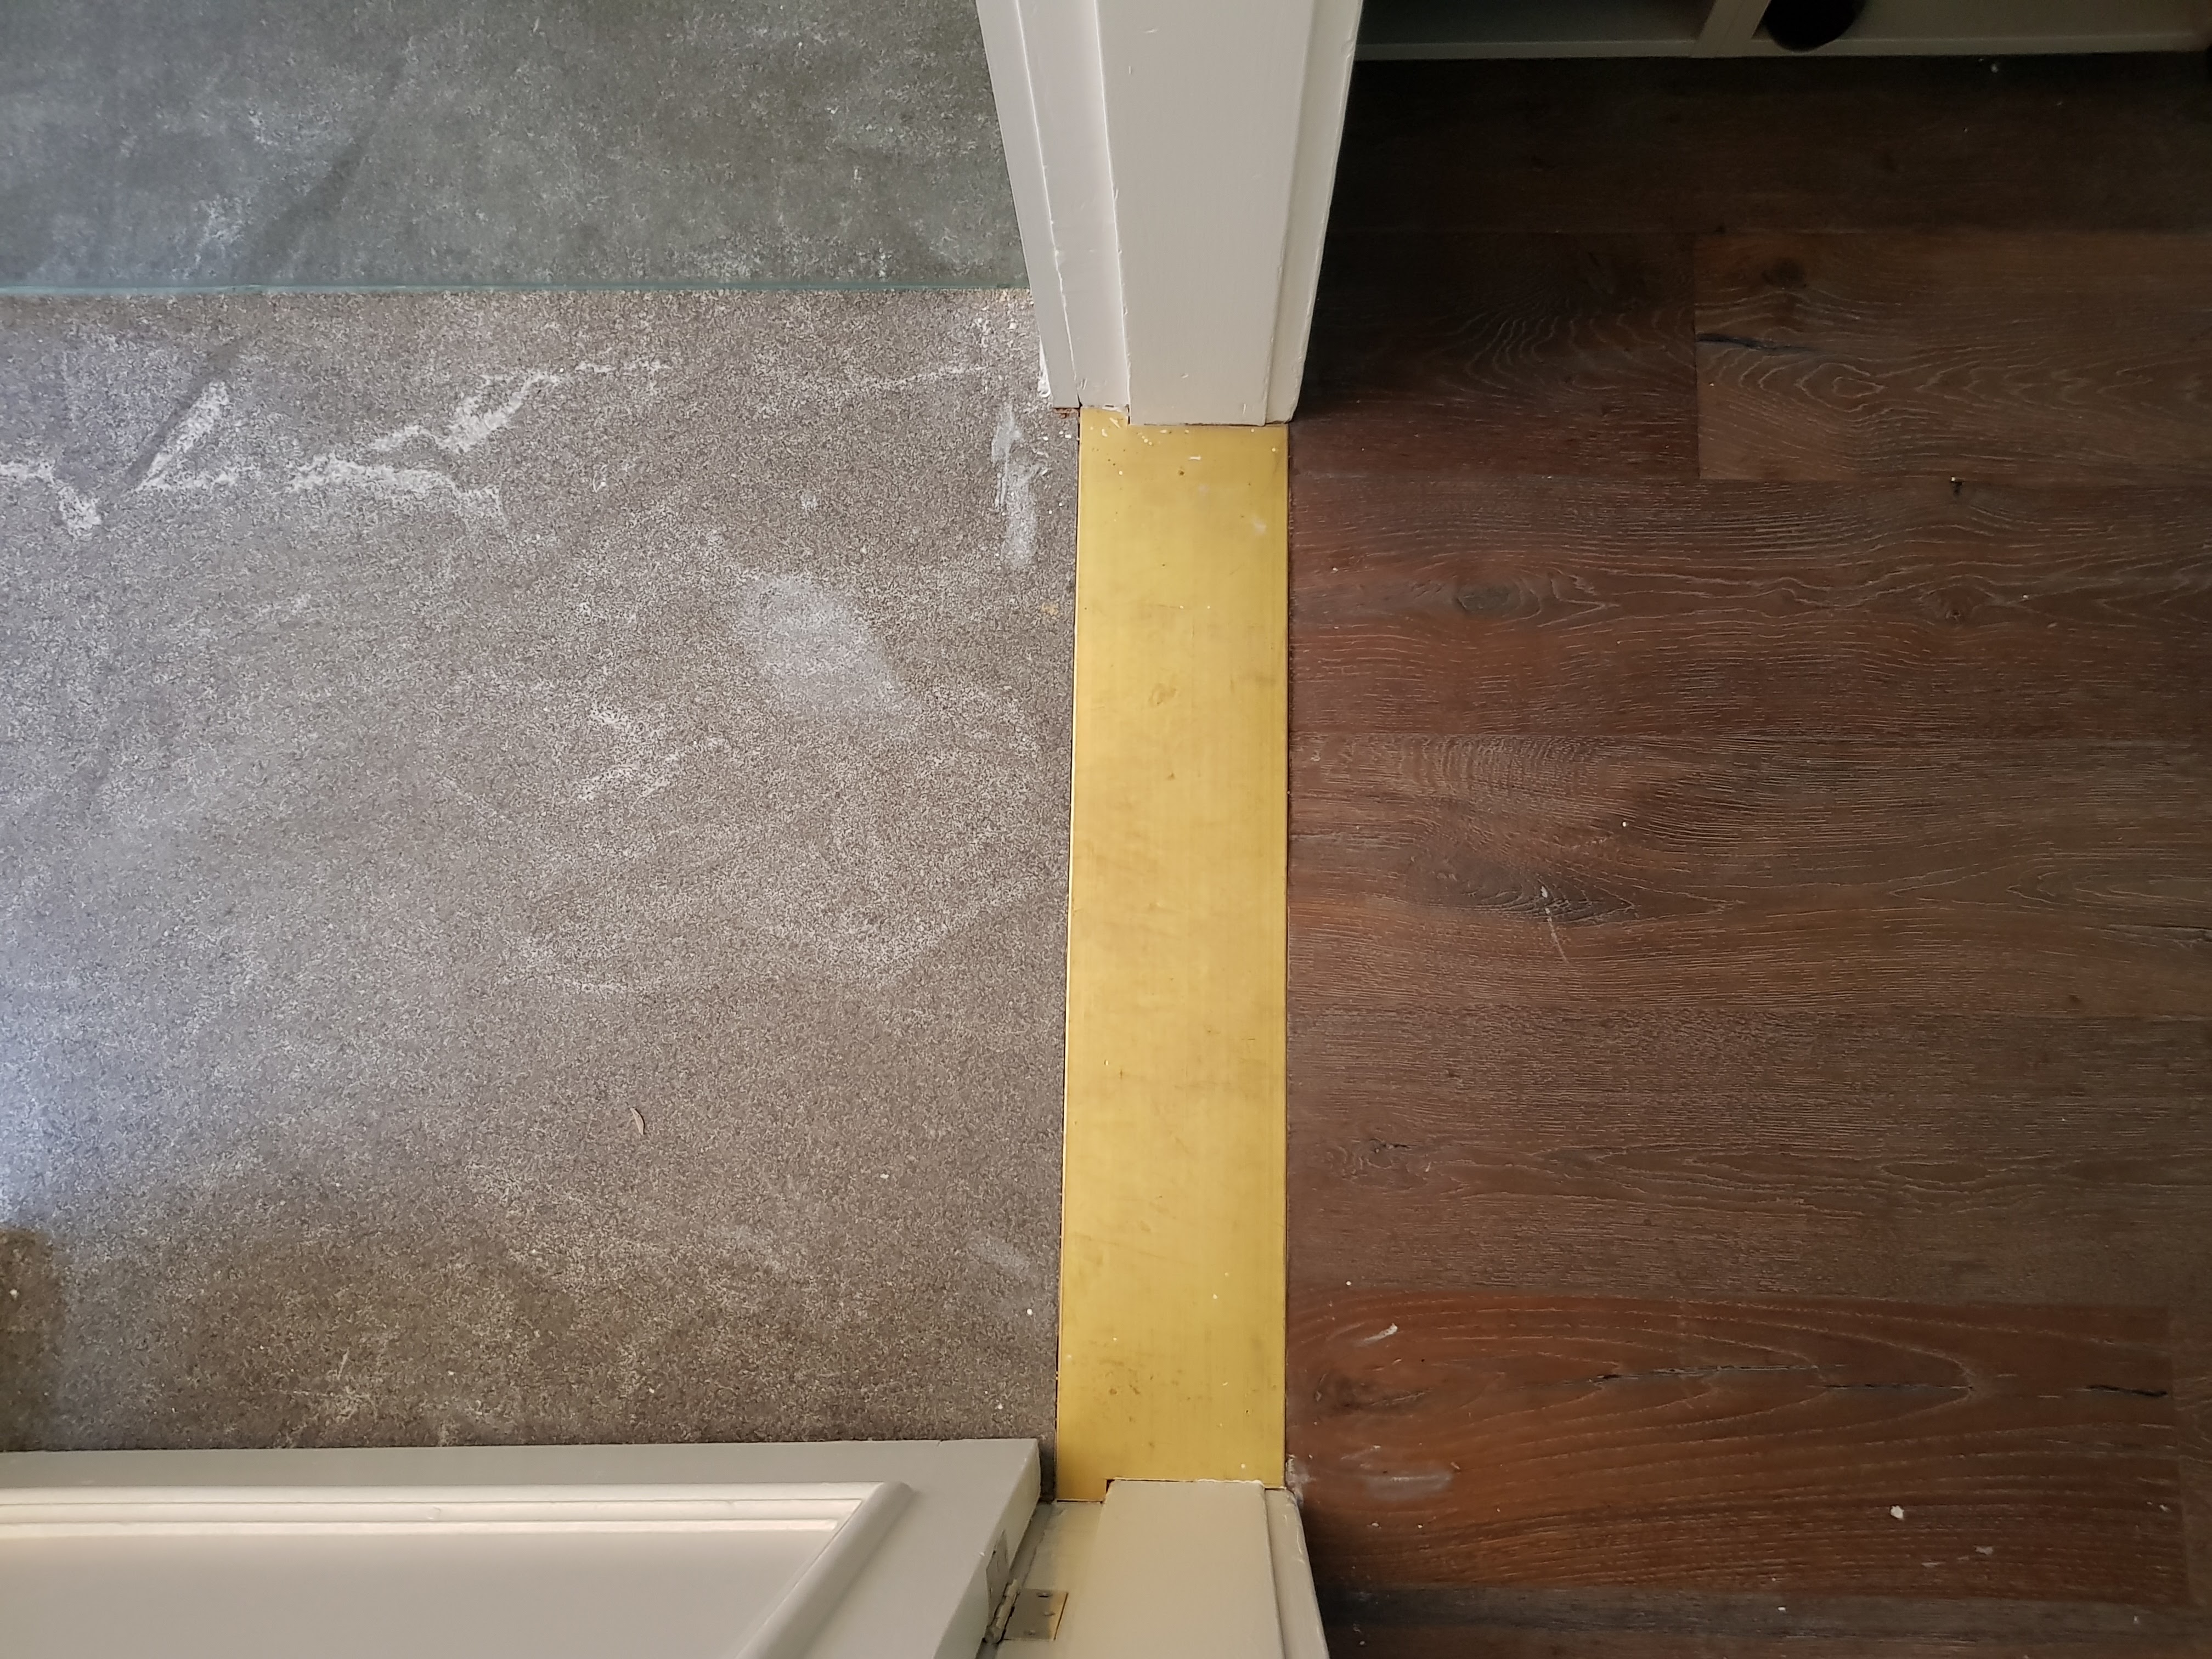 A yellow strip of paper on the floor